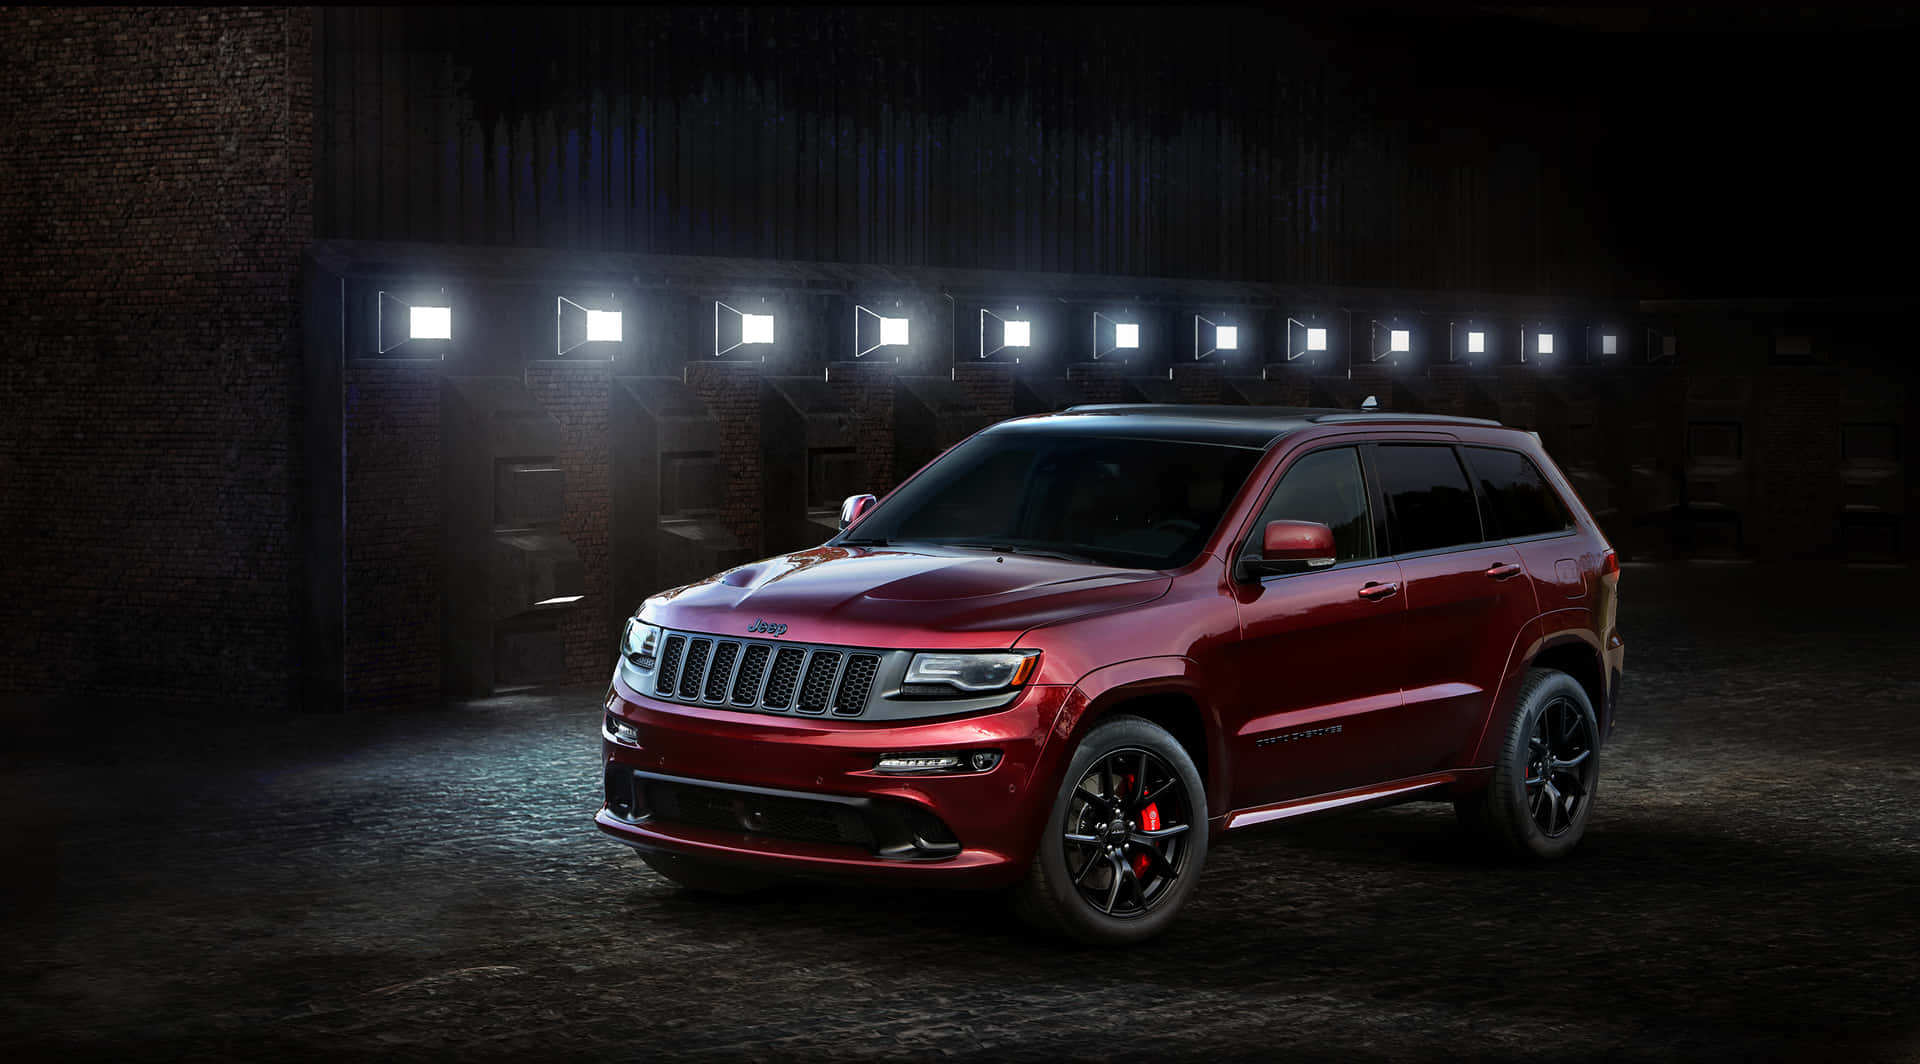 The Red Jeep Grand Cherokee Is Parked In A Dark Room Wallpaper